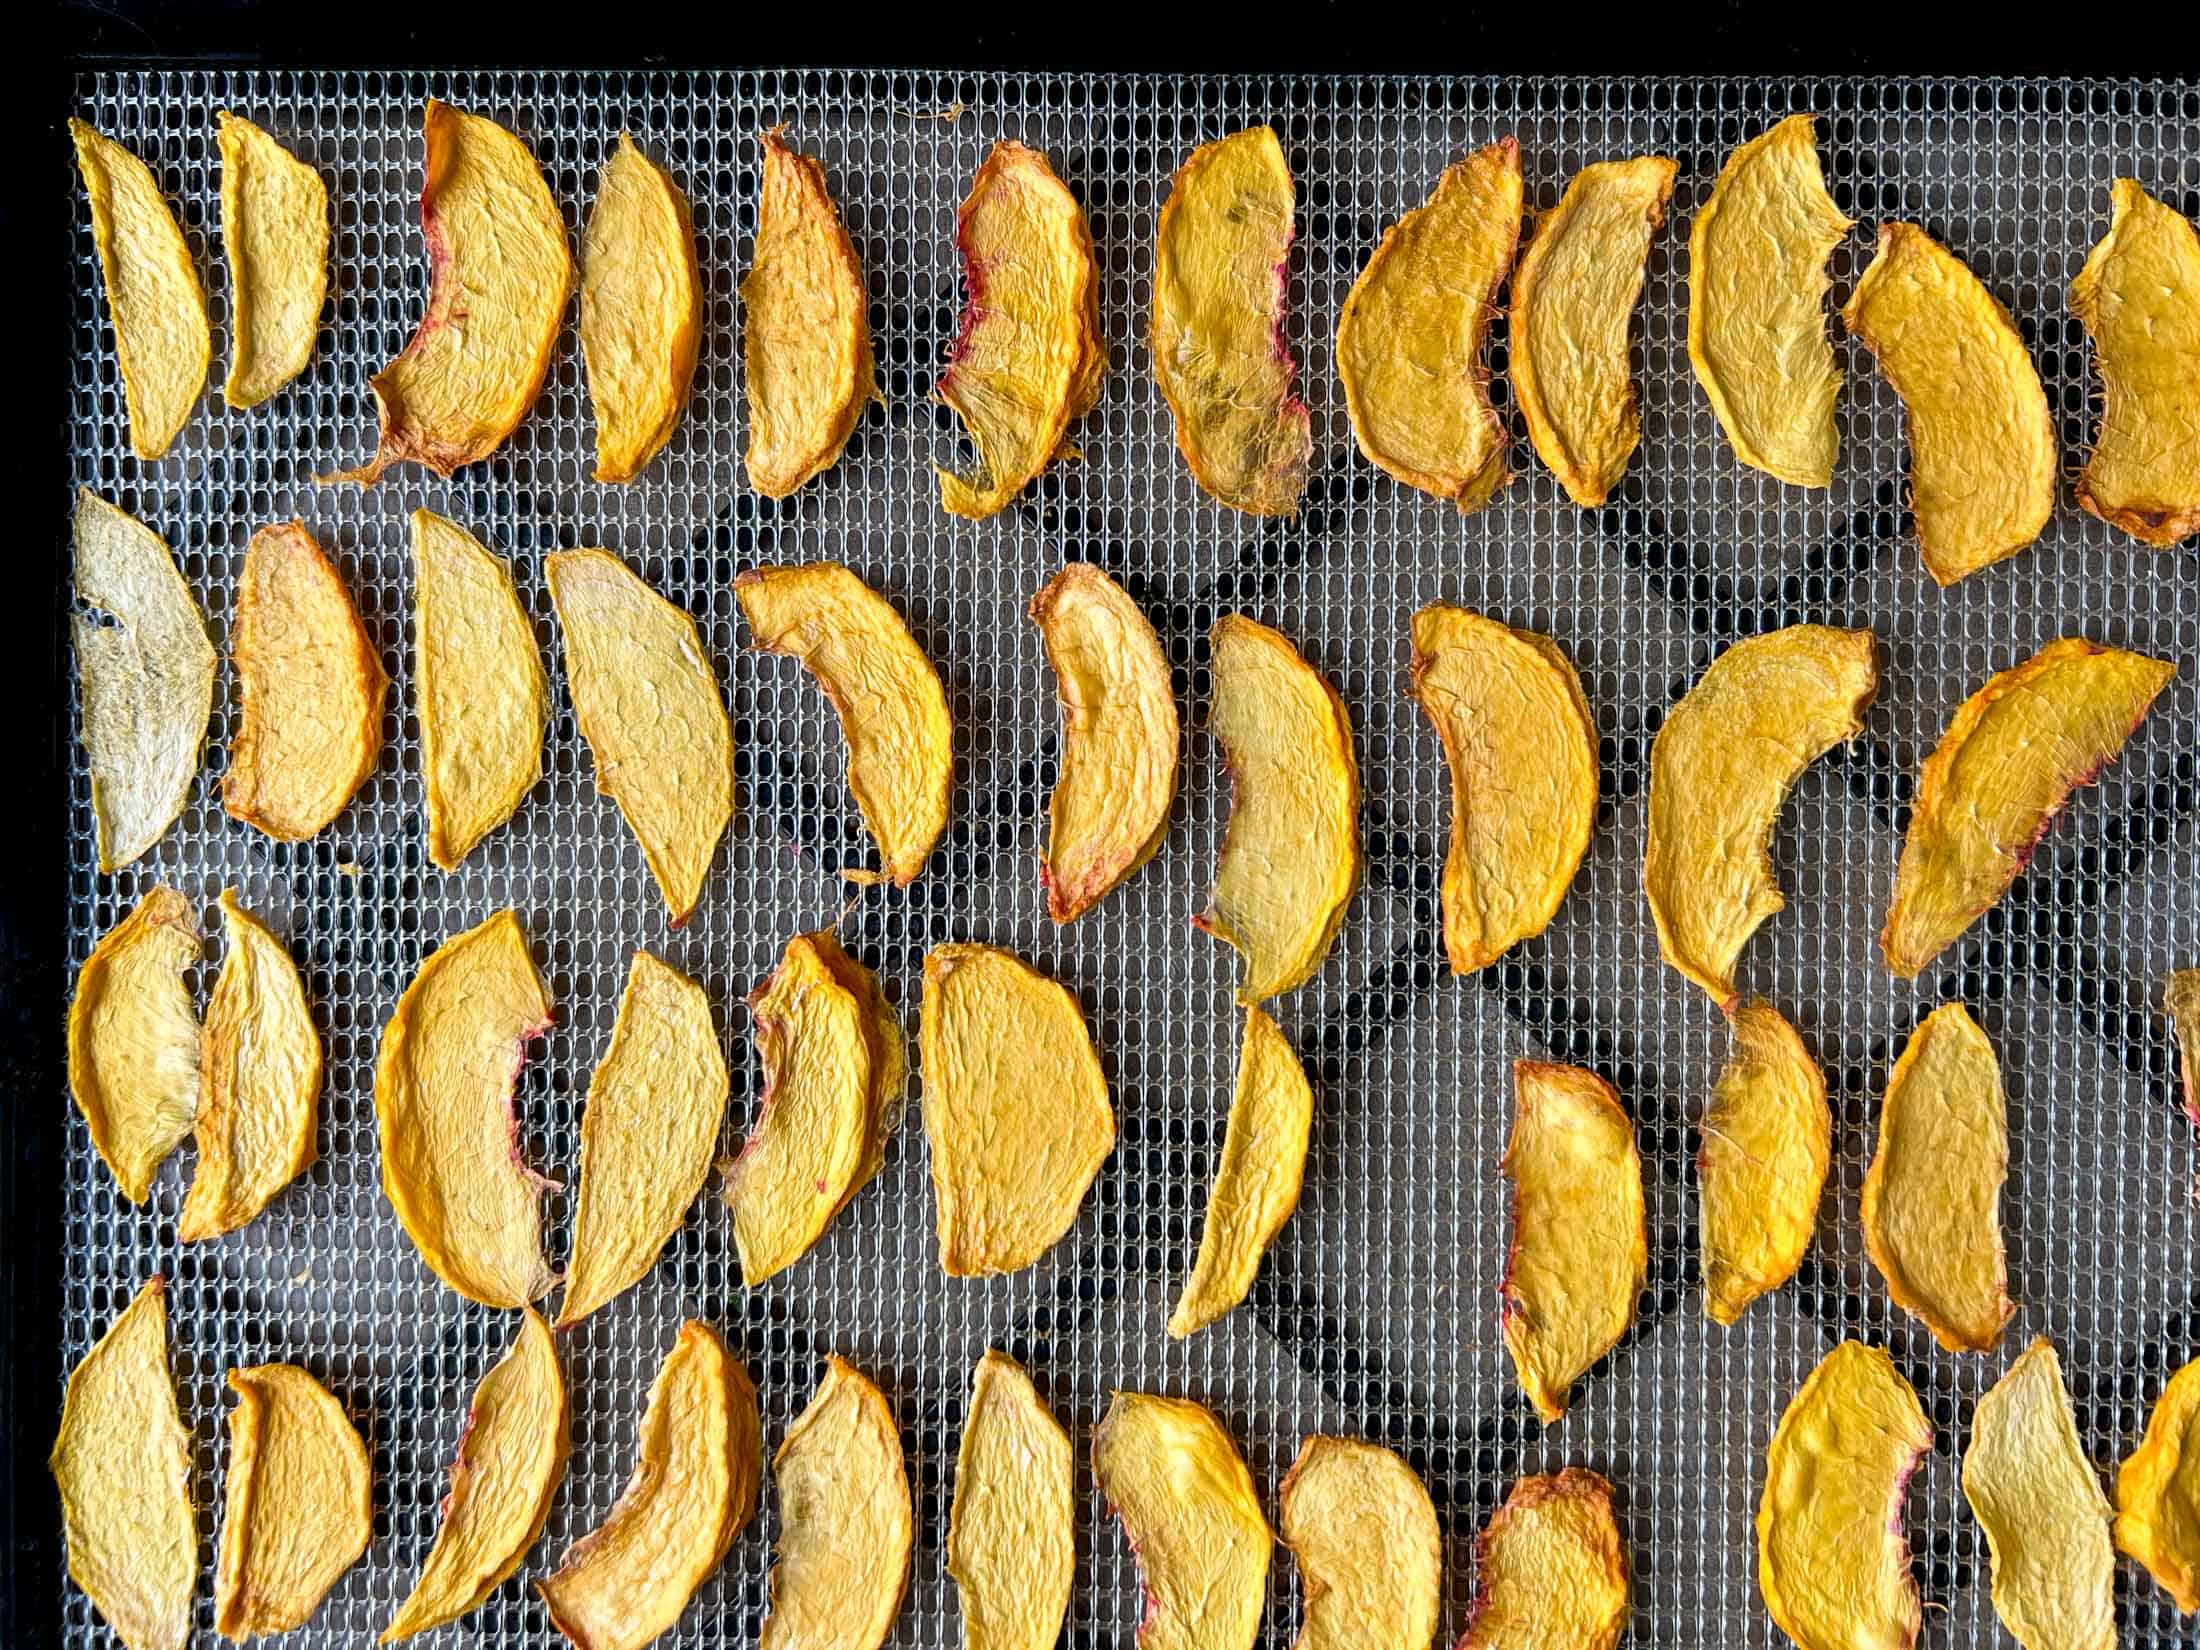 Dehydrated peaches on a dehydrator tray.